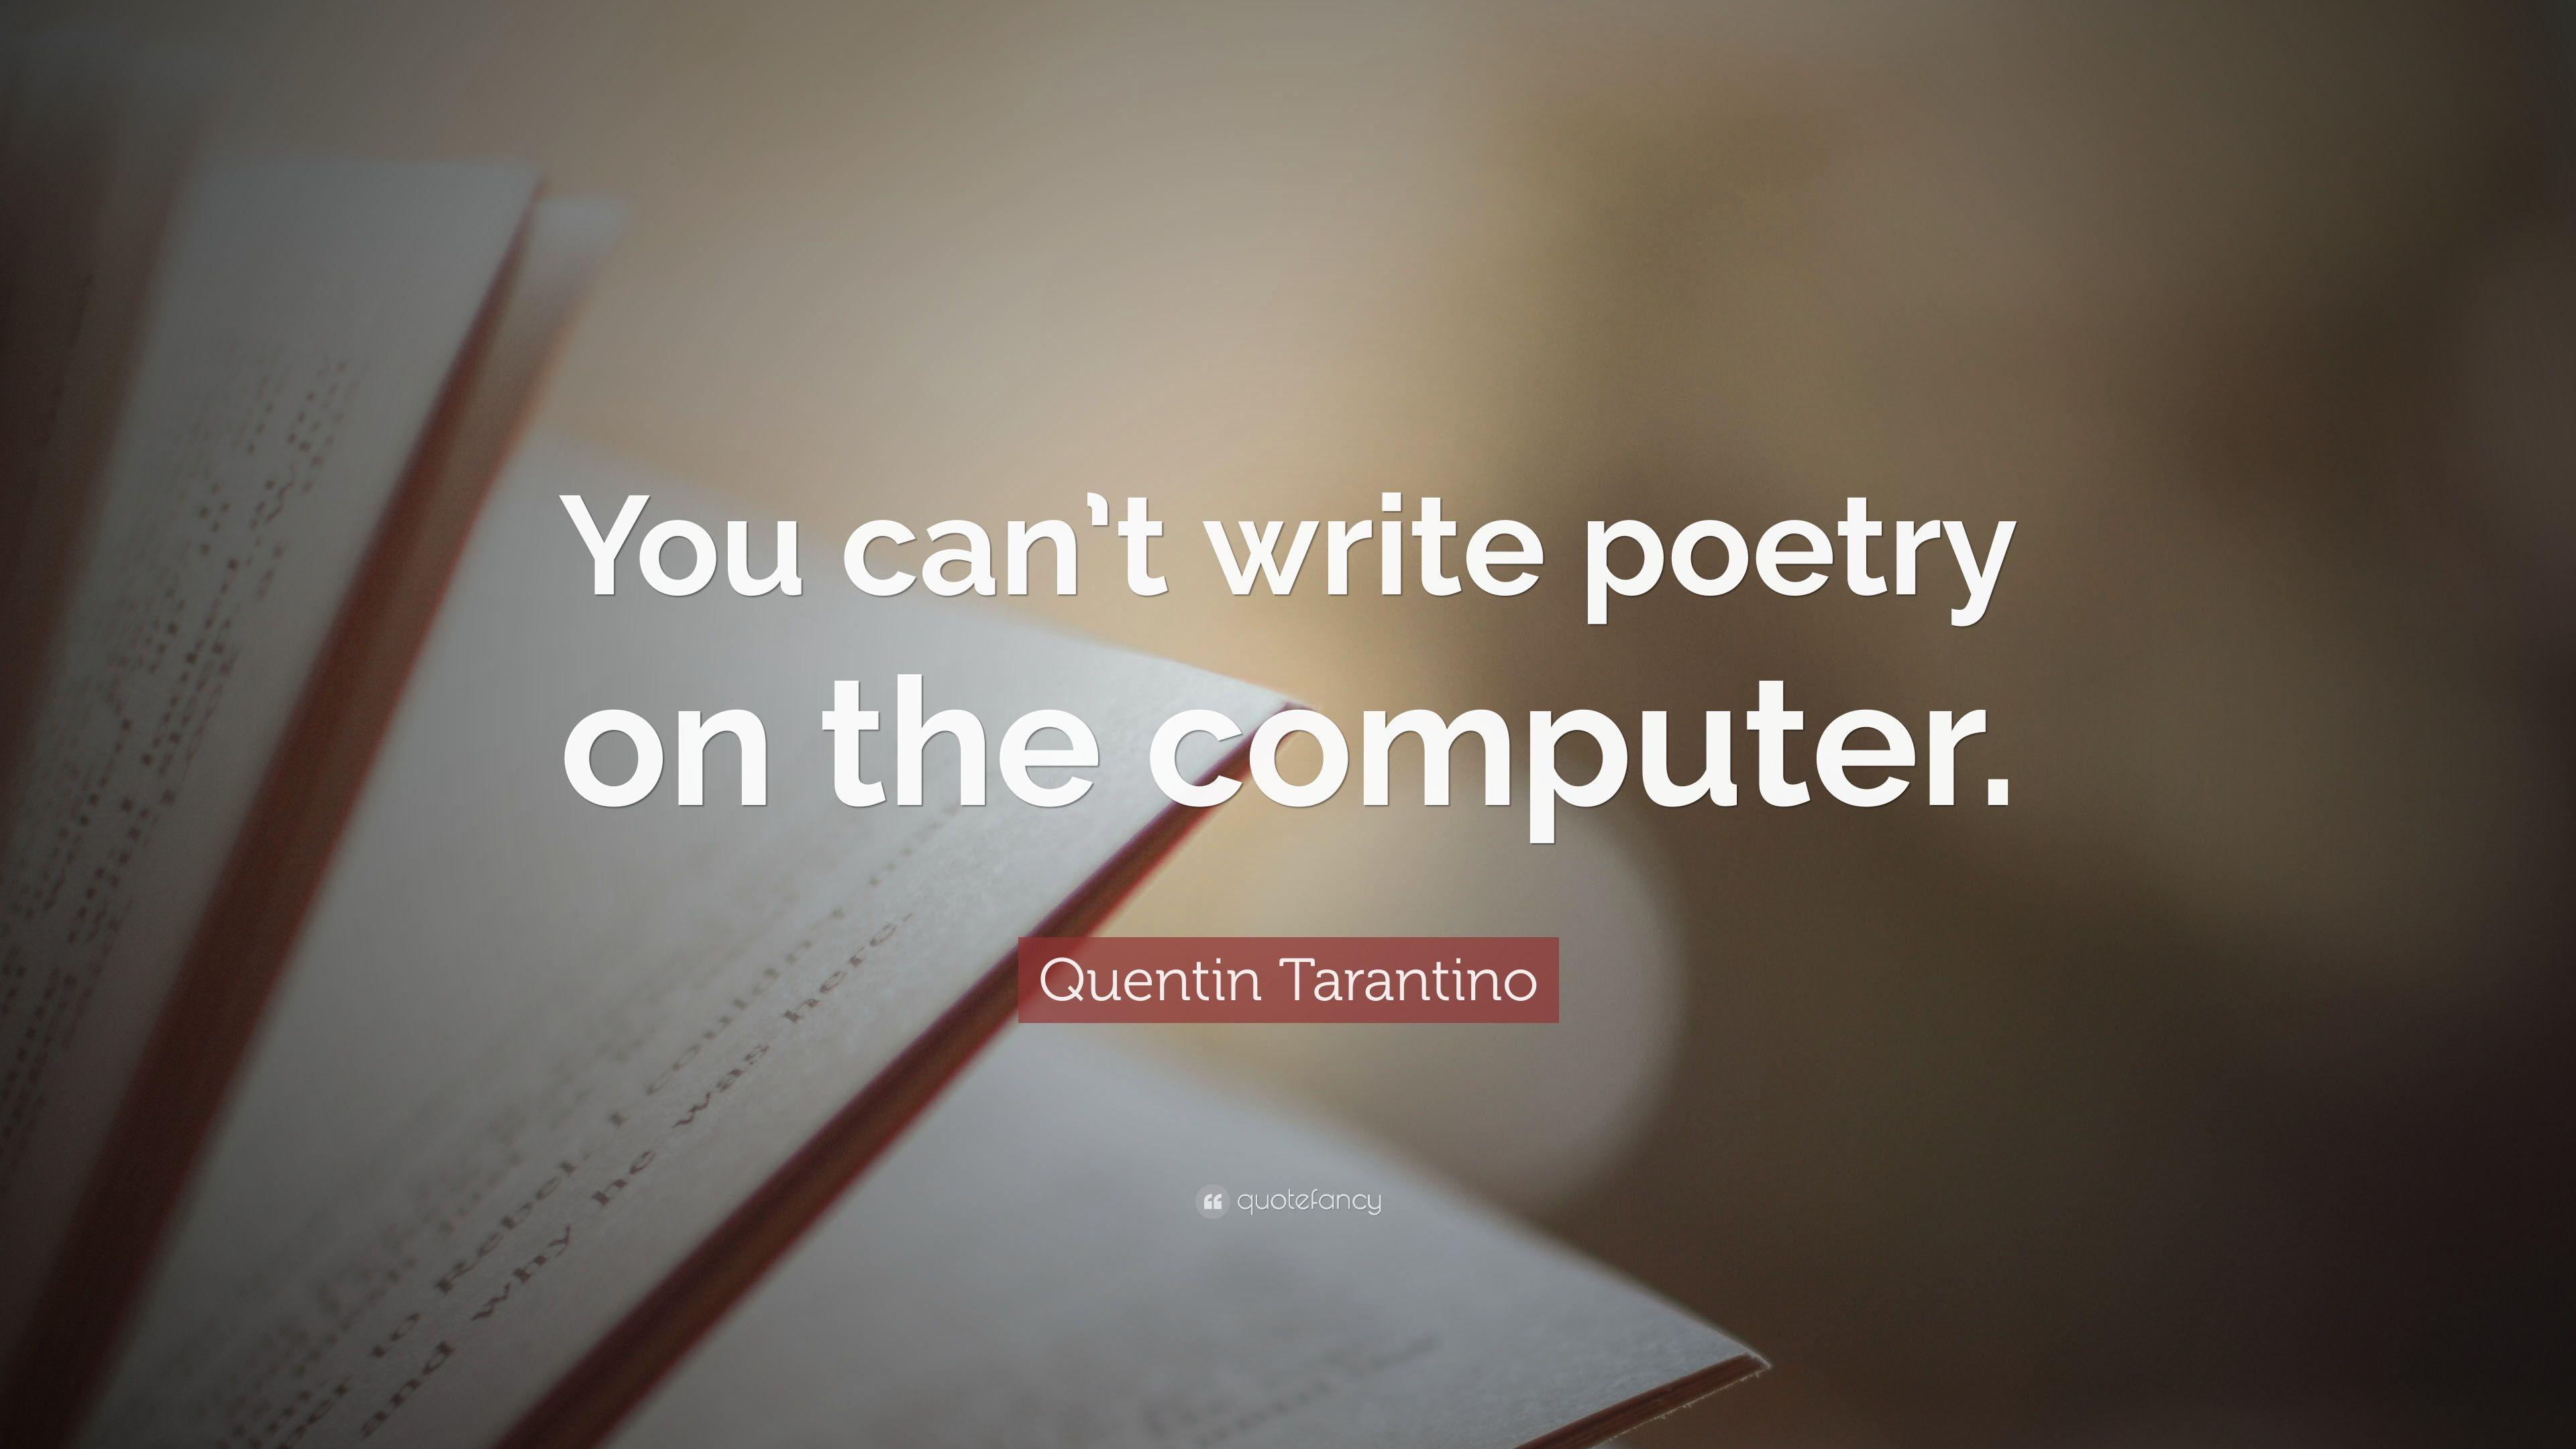 Quentin Tarantino Quote: “You can't write poetry on the computer